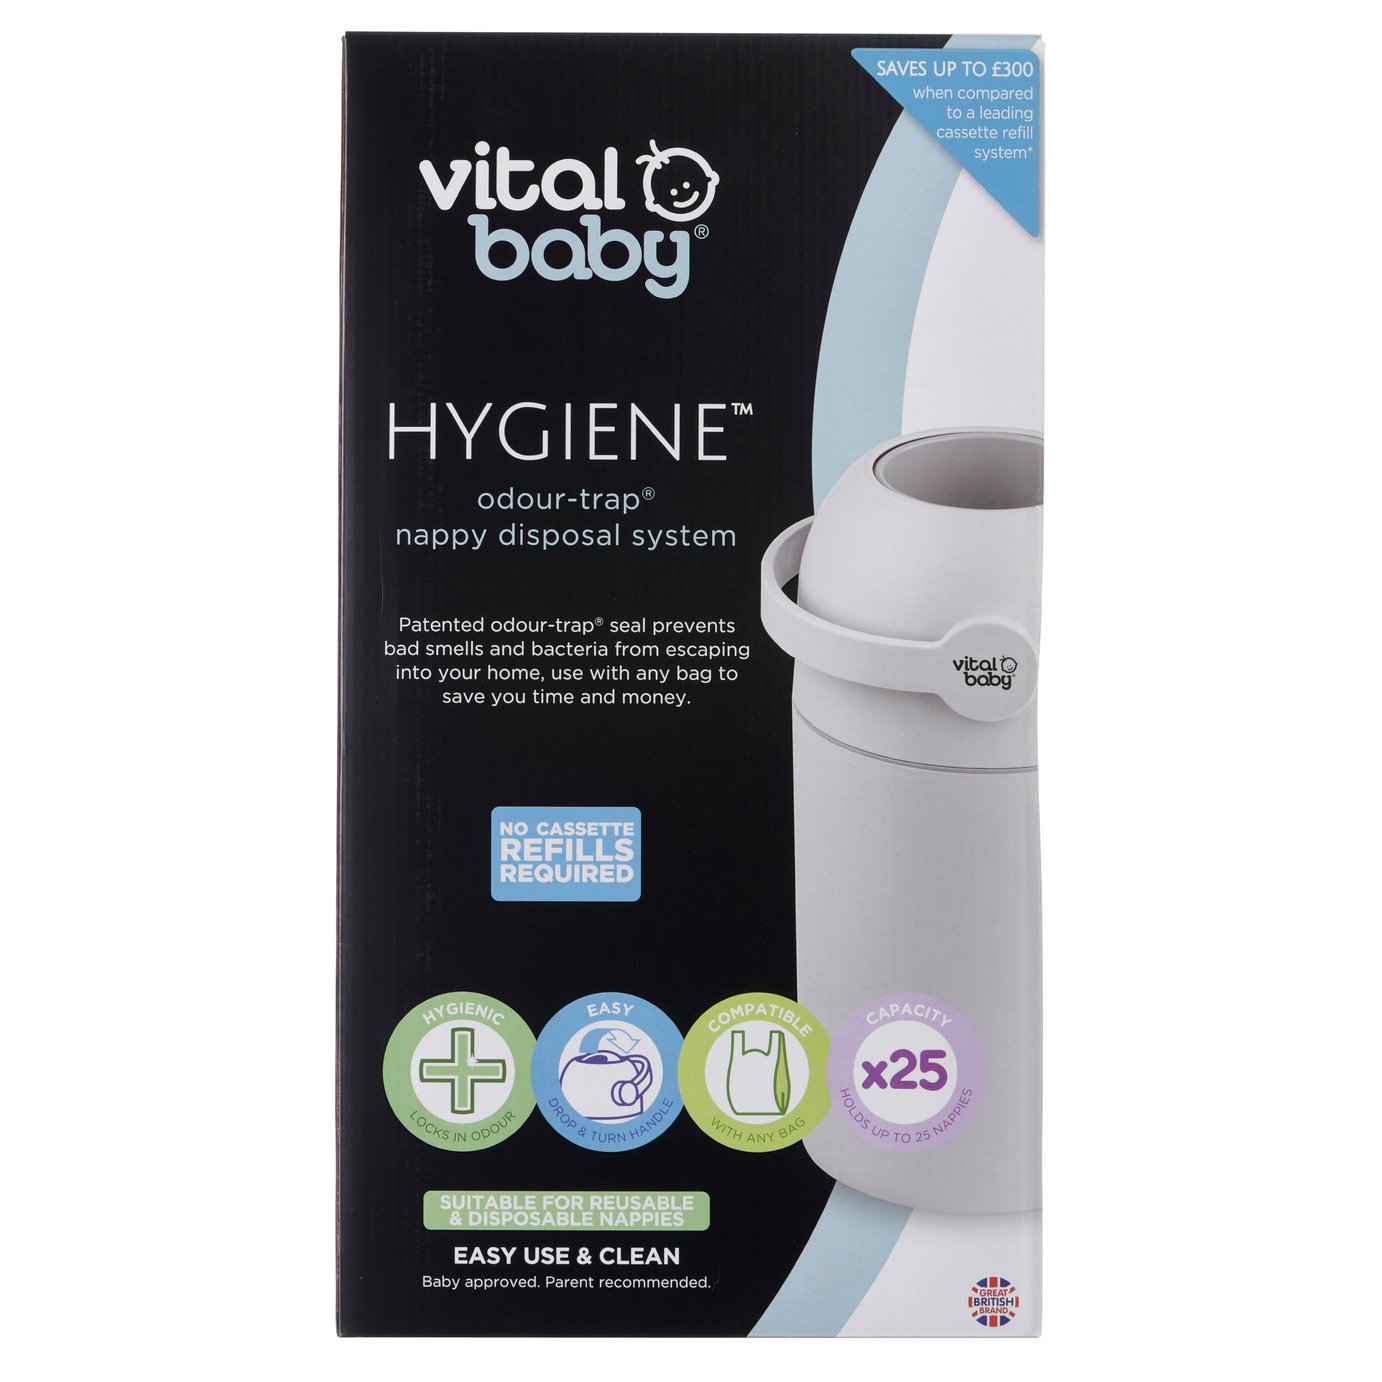 Vital Baby Hygiene Odour Trap Nappy Disposal System Review